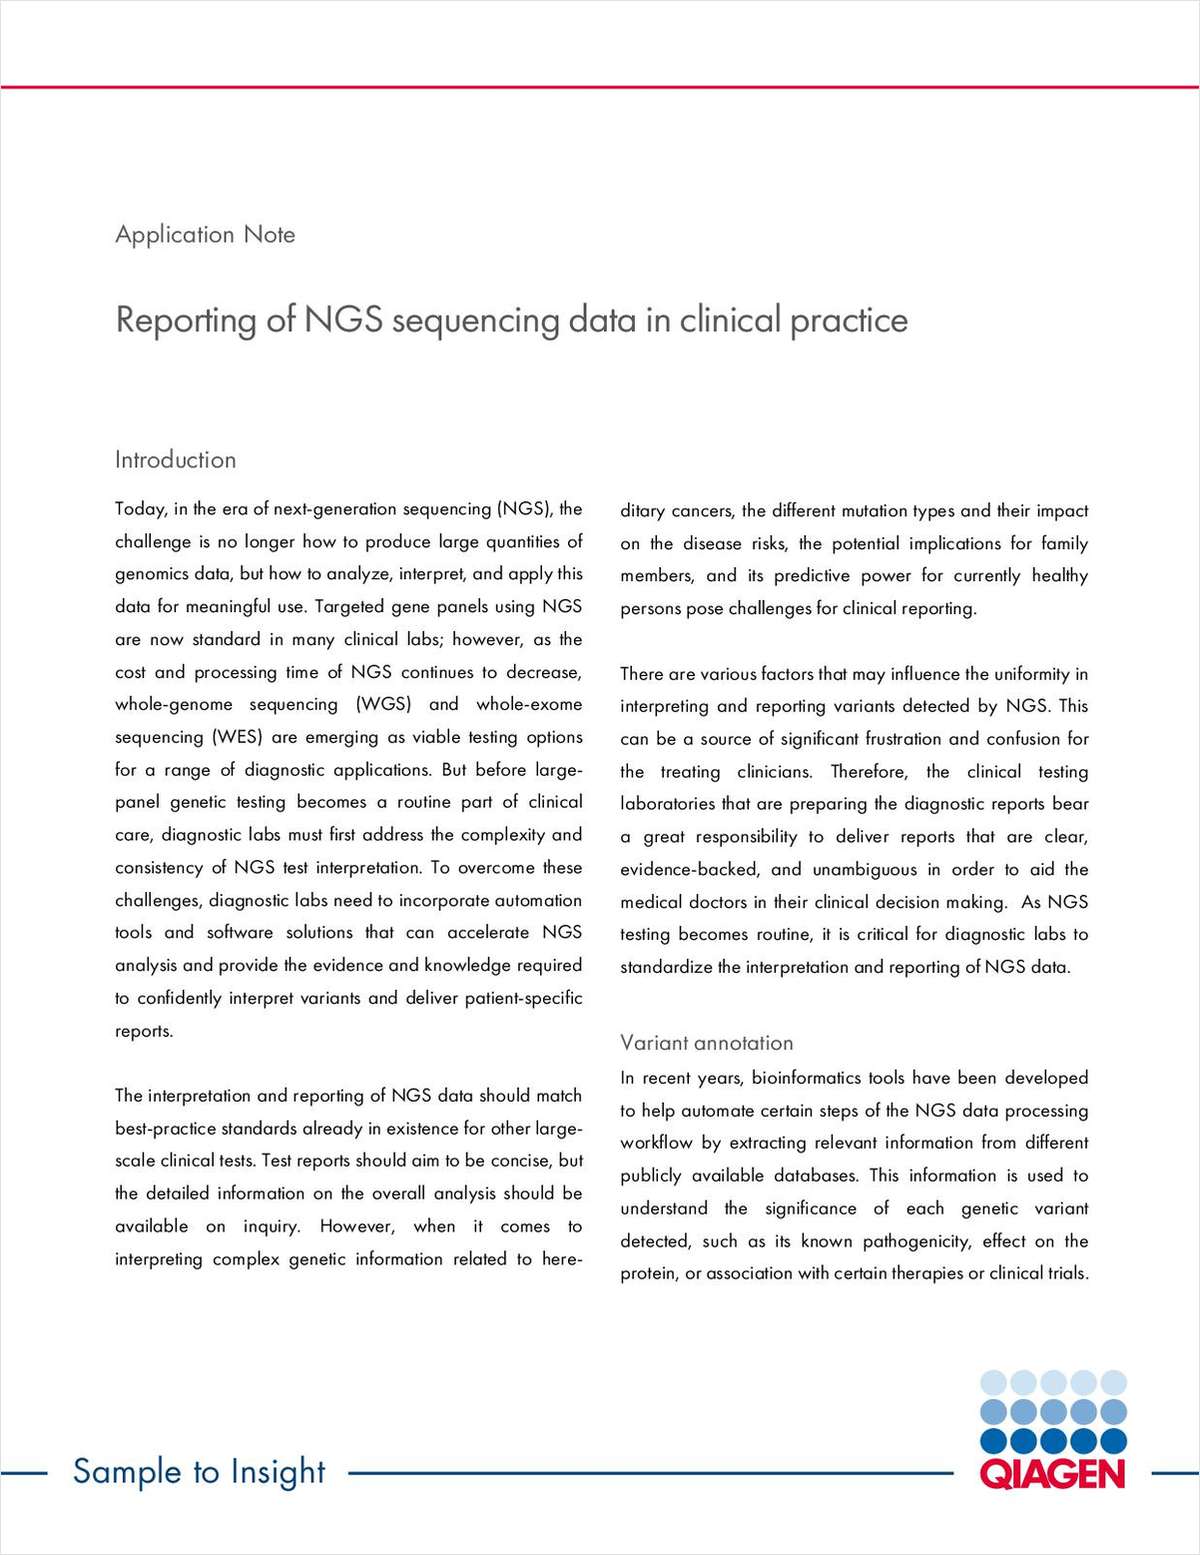 Reporting NGS Sequencing Data in Clinical Practice